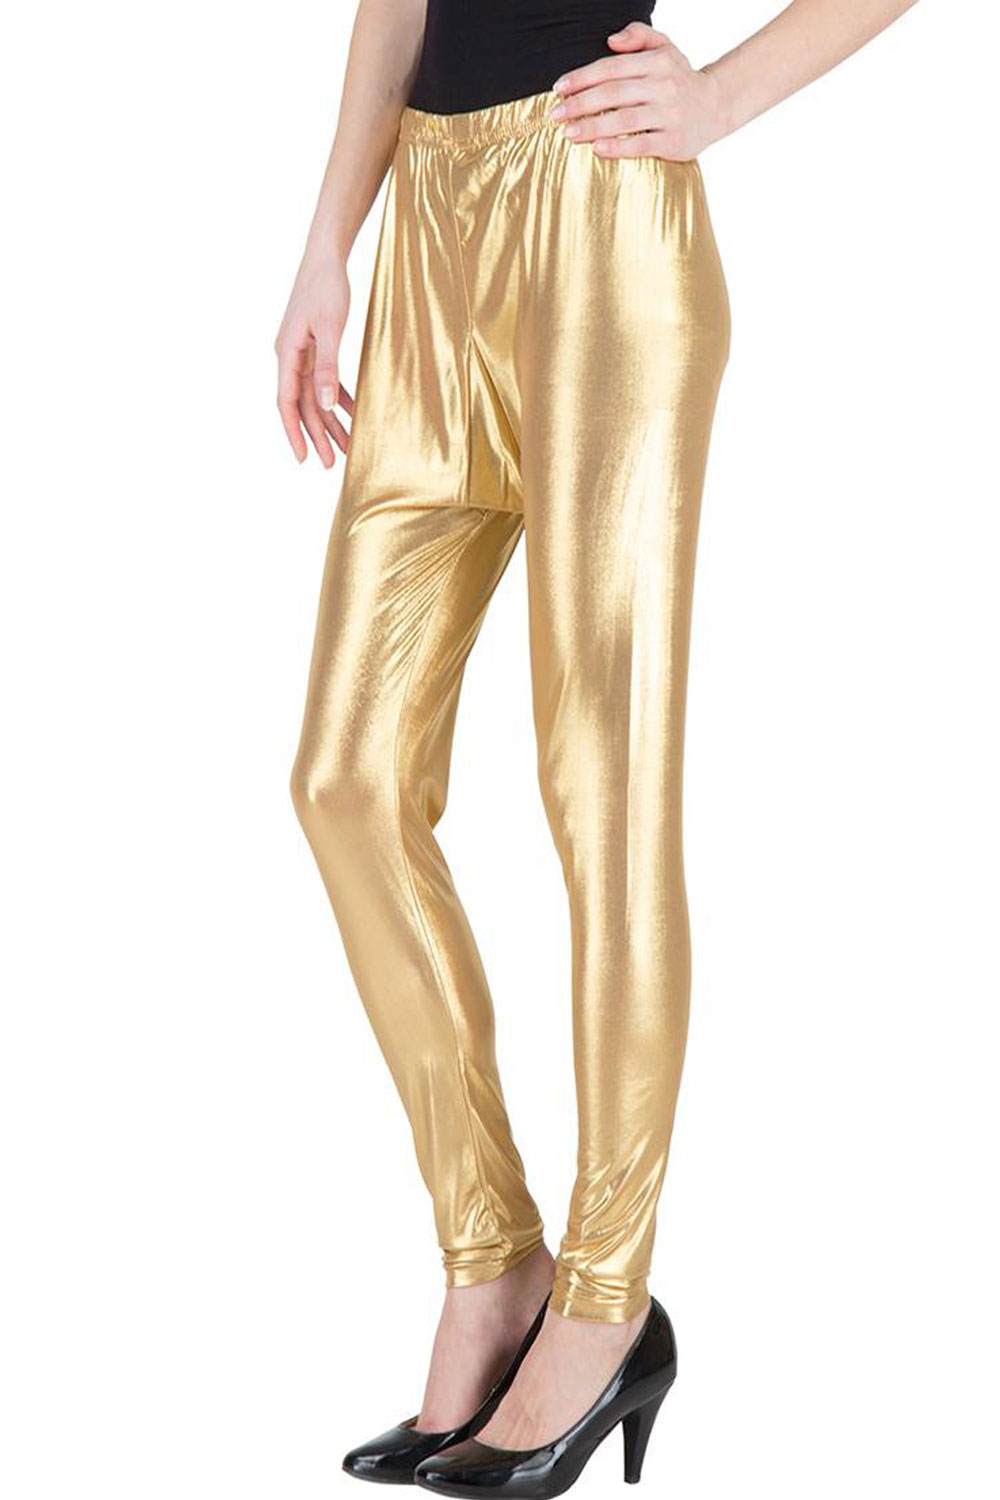 Stretchy gold shimmer leggings from Free People | Shimmer leggings, Gold  shimmer, Stretchy